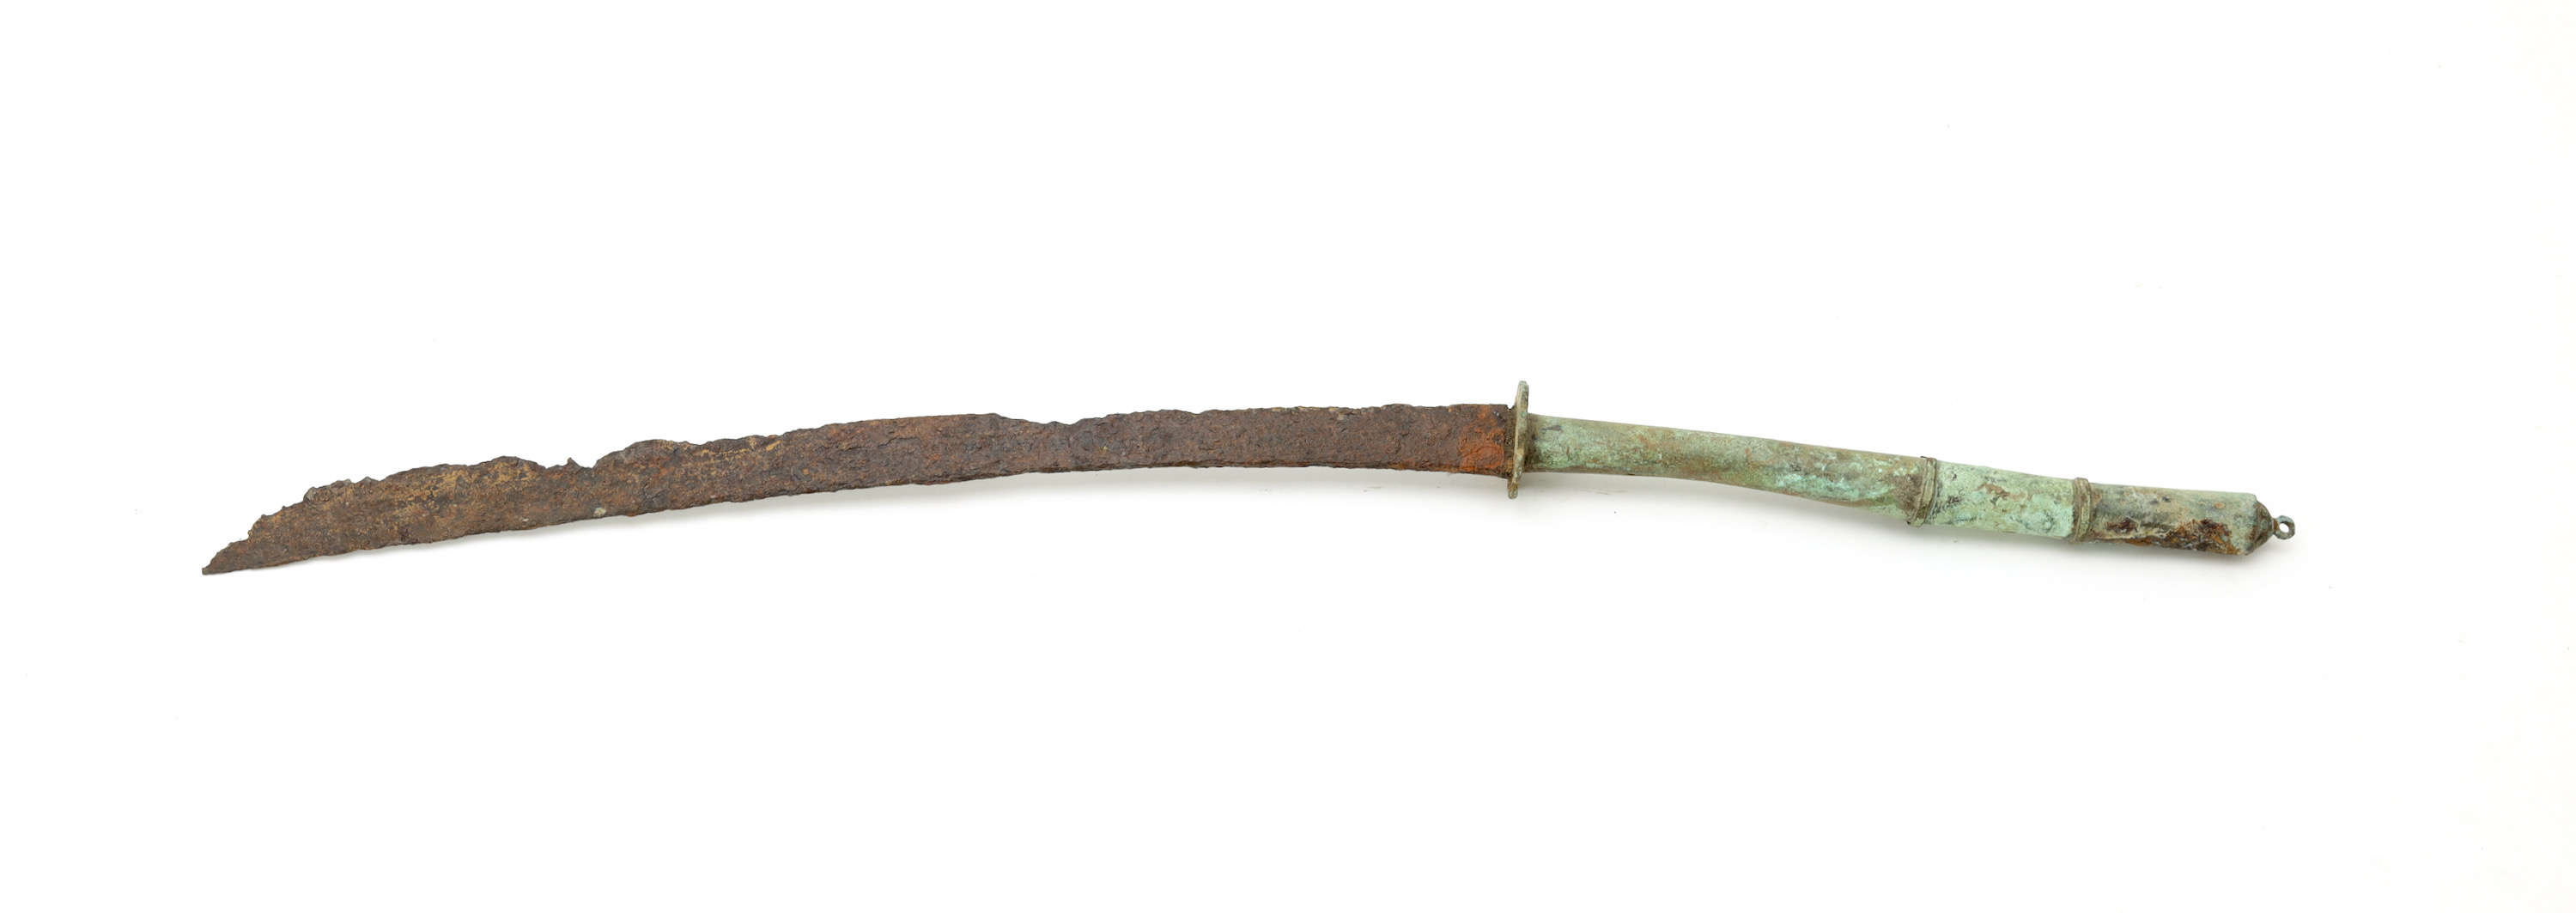 Old excavated southeast asian dha sword